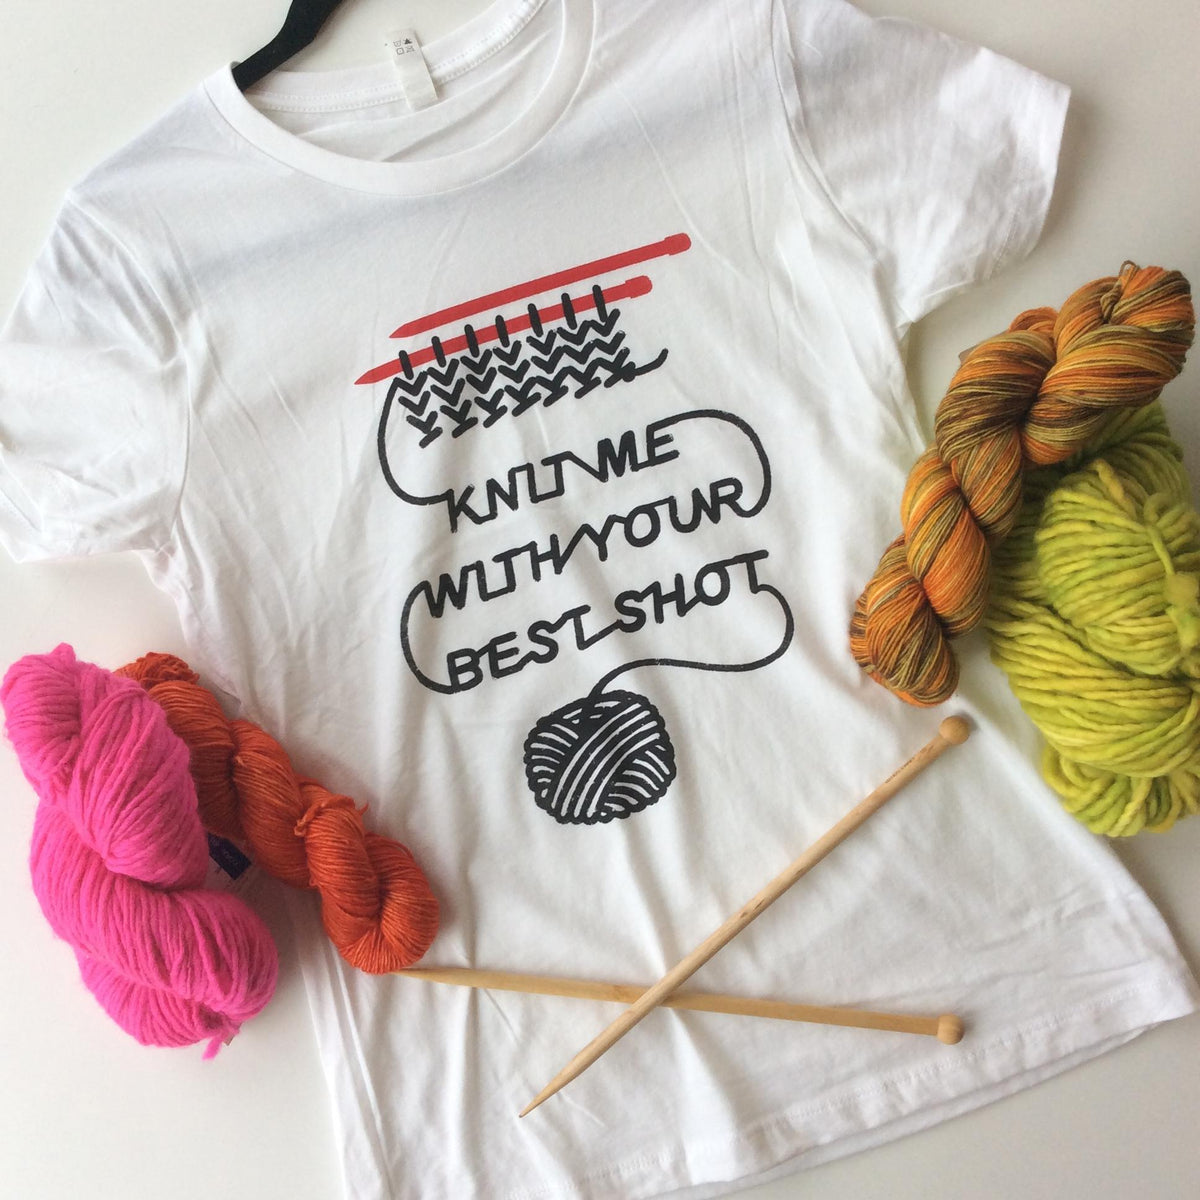 Knit Me With Your Best Shot Tee